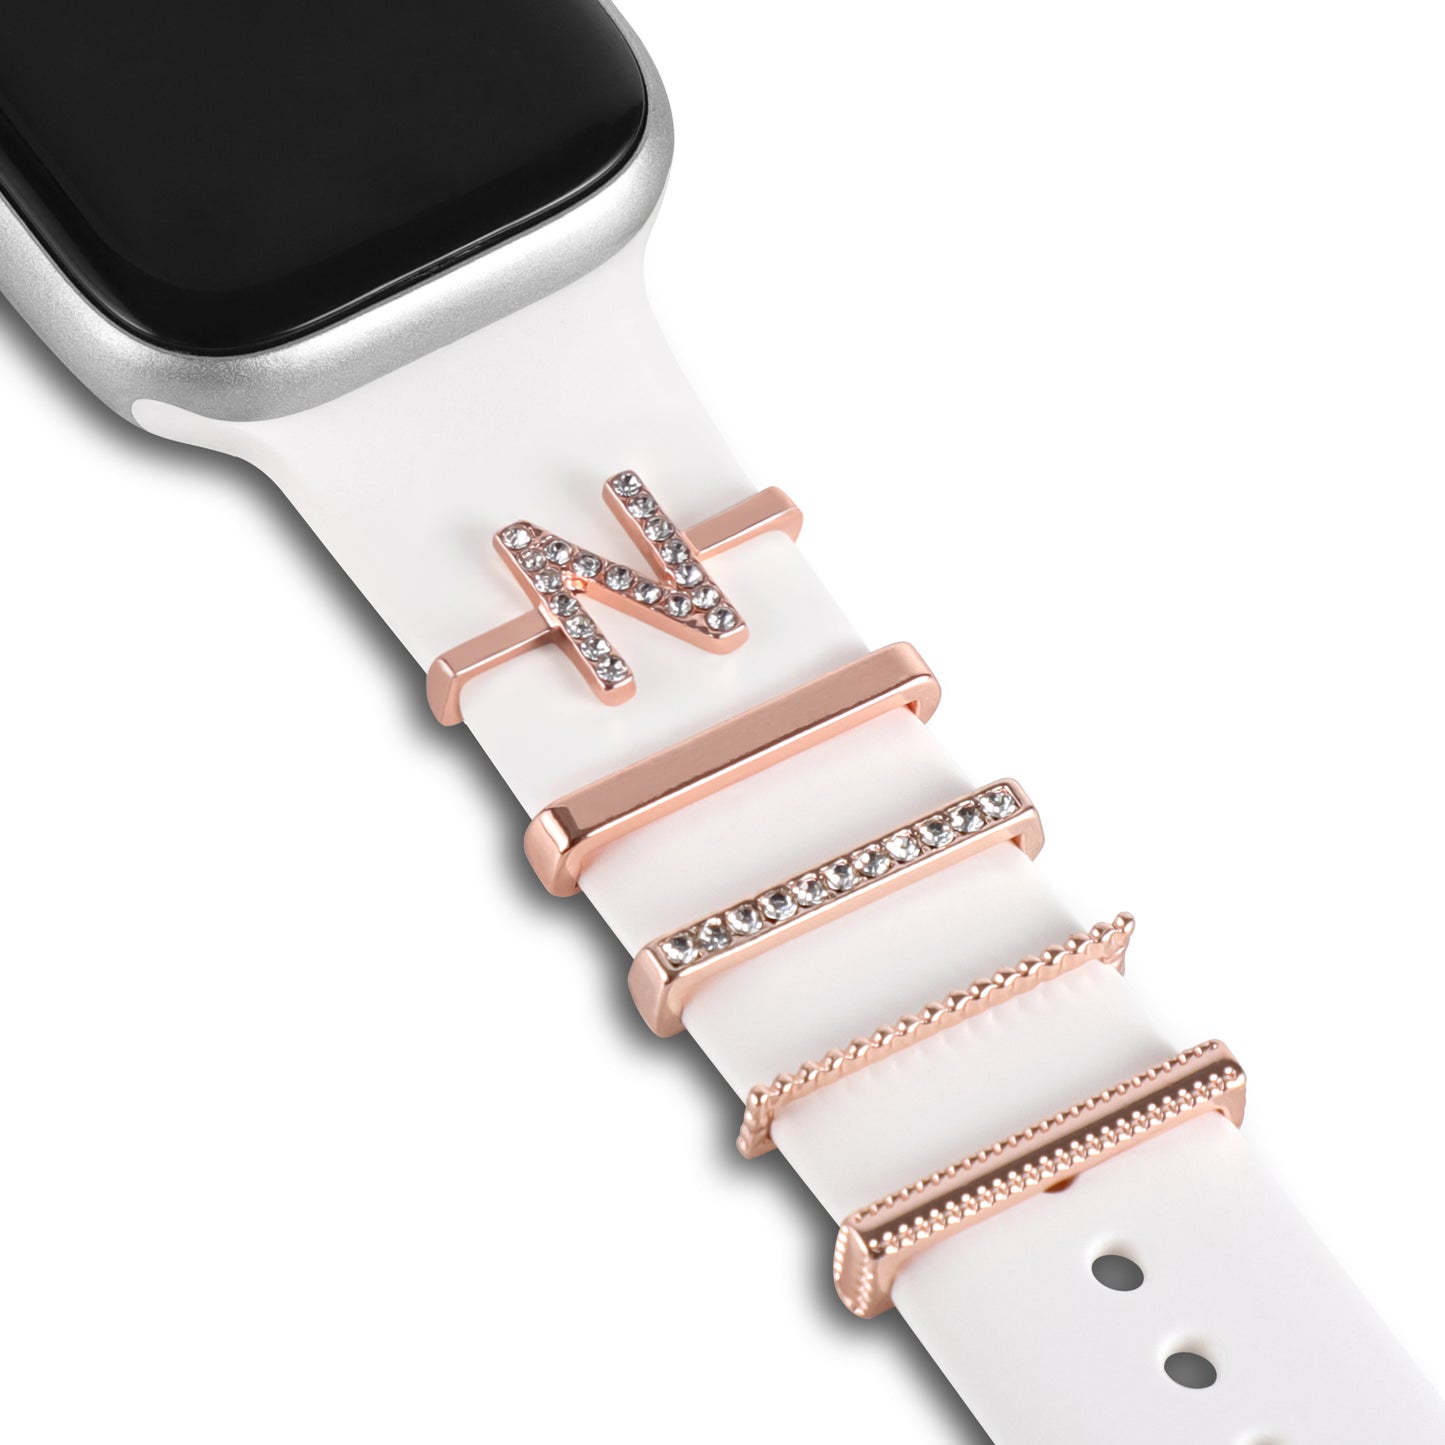 arktisband Apple Watch Charms "N Style"